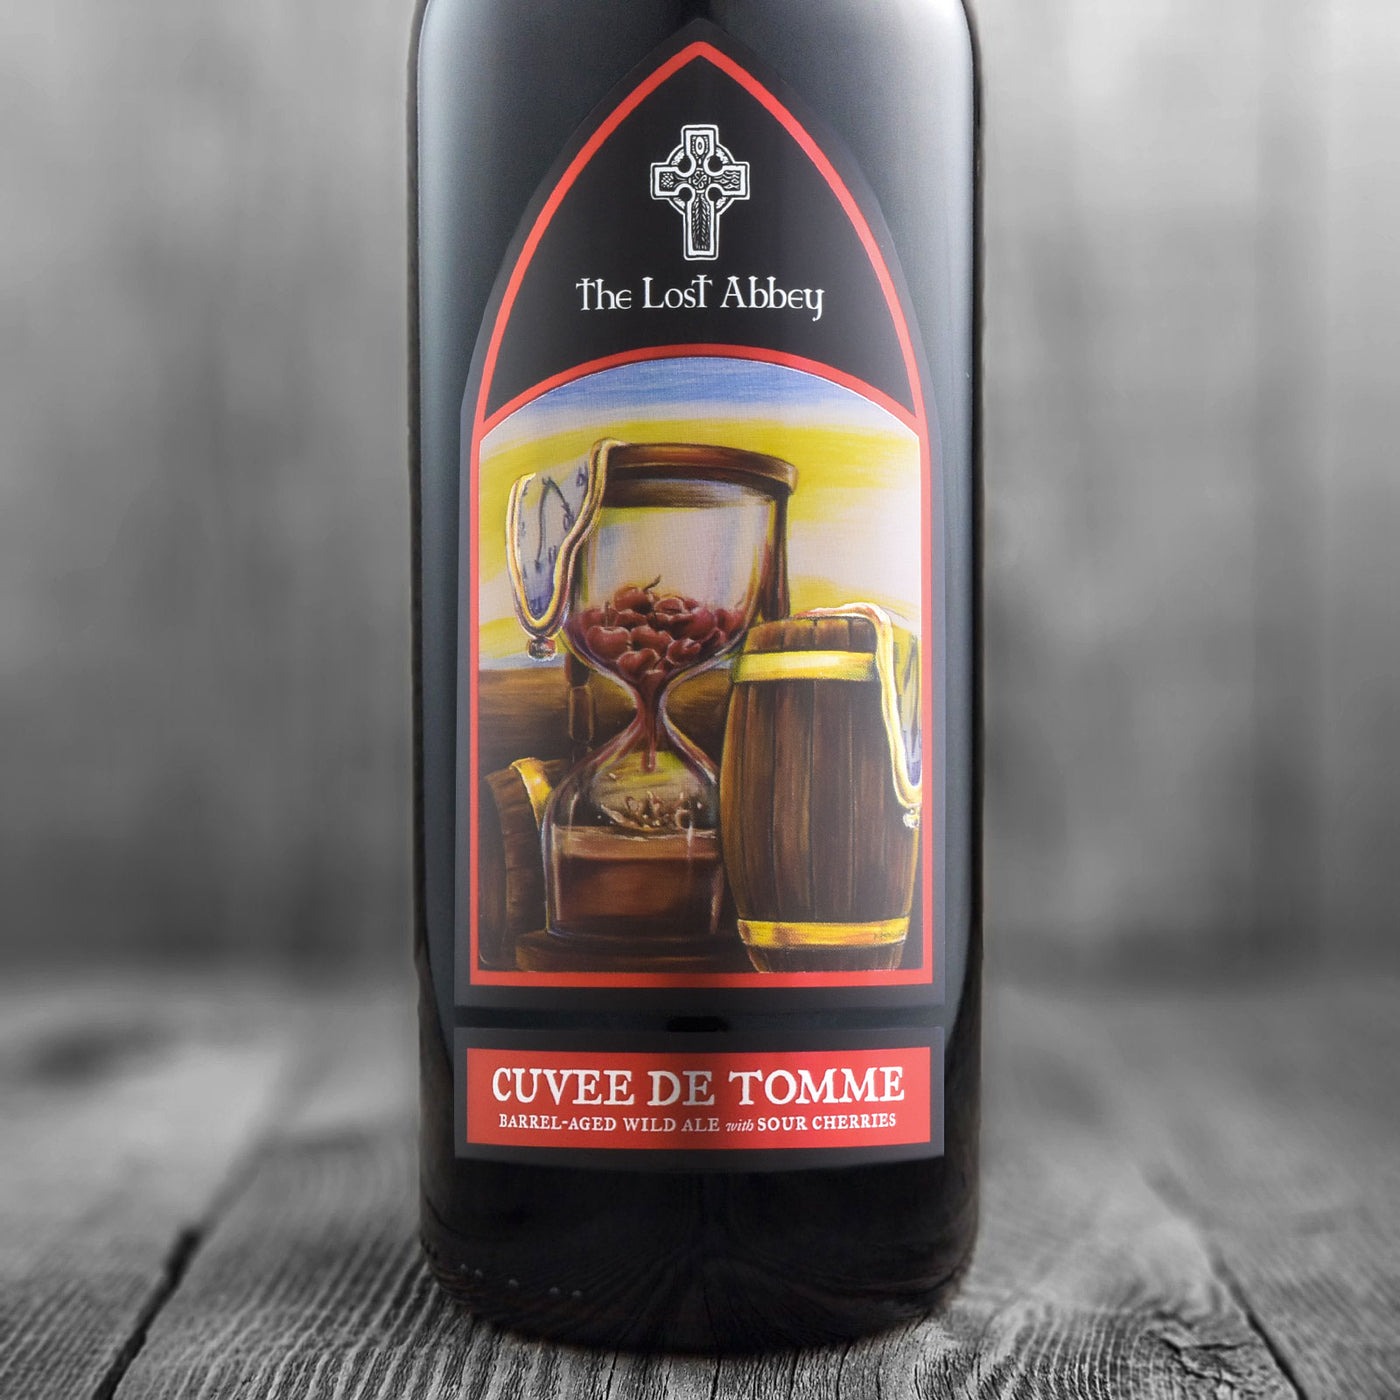 The Lost Abbey Cuvee De Tomme